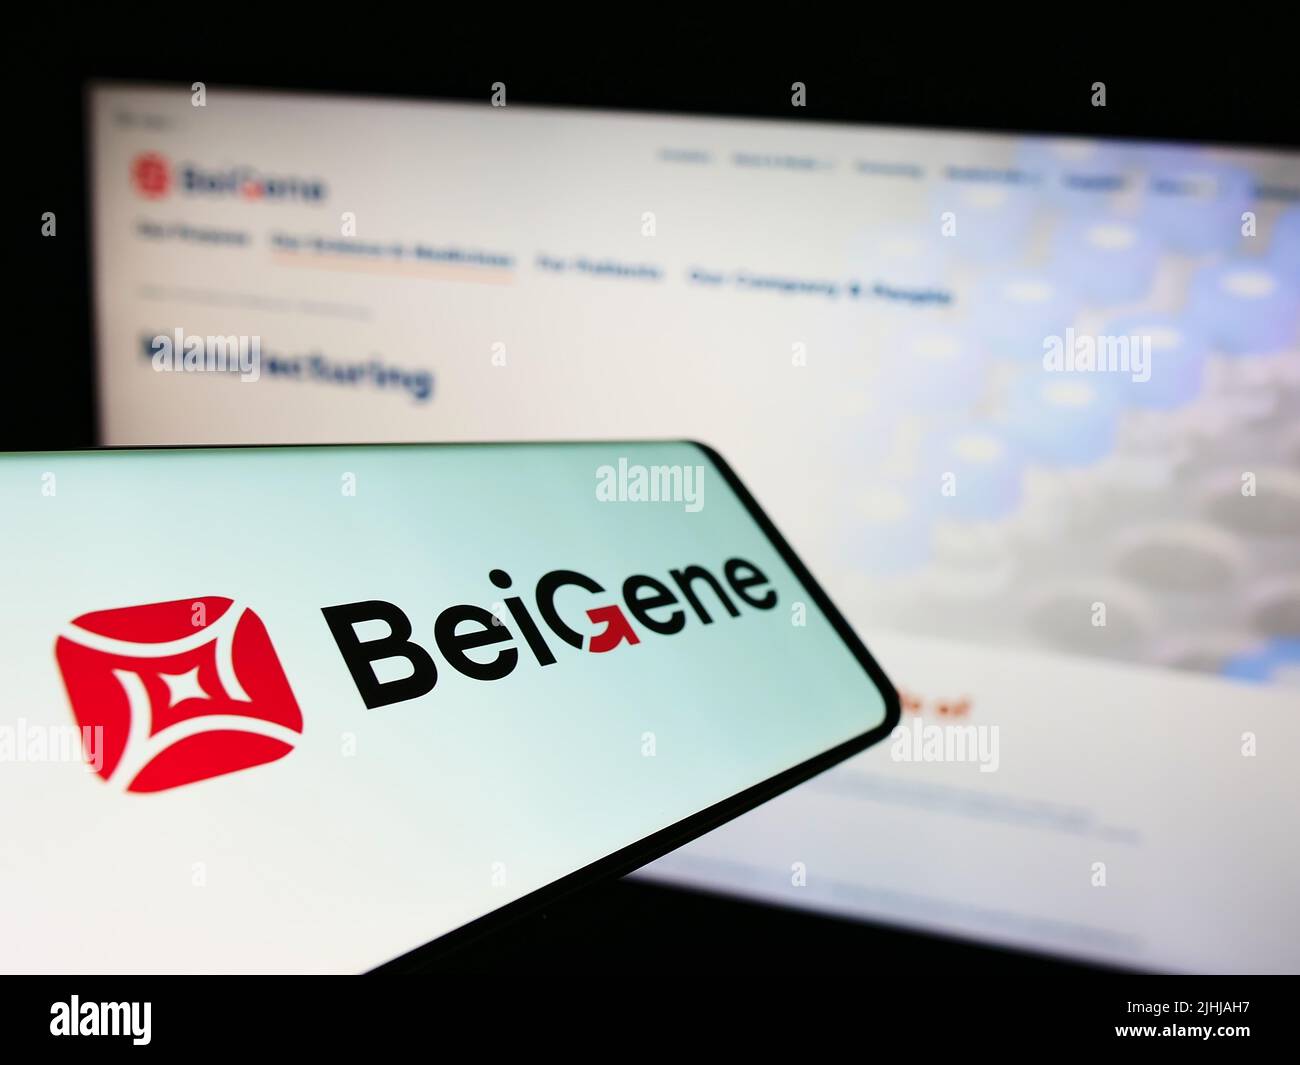 Cellphone with logo of Chinese biotechnology company Beigene Ltd. on screen in front of business website. Focus on center of phone display. Stock Photo